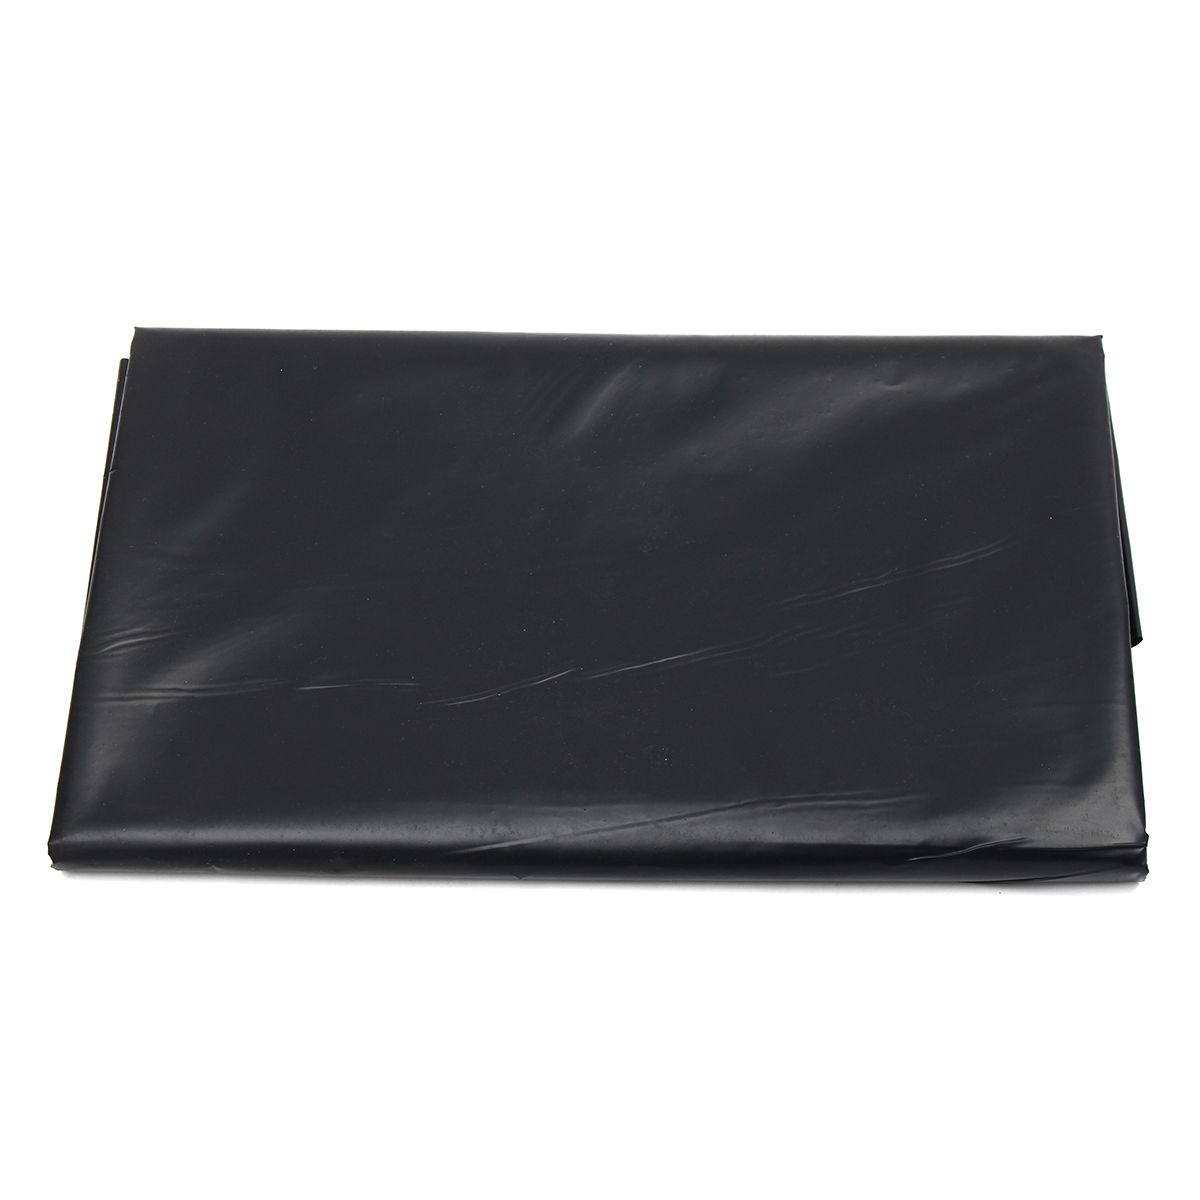 15X3M-HDPE-Pond-Liner-Heavy-Duty-Landscaping-Garden-Pool-Cover-Waterfall-Liner-Cloth-1390601